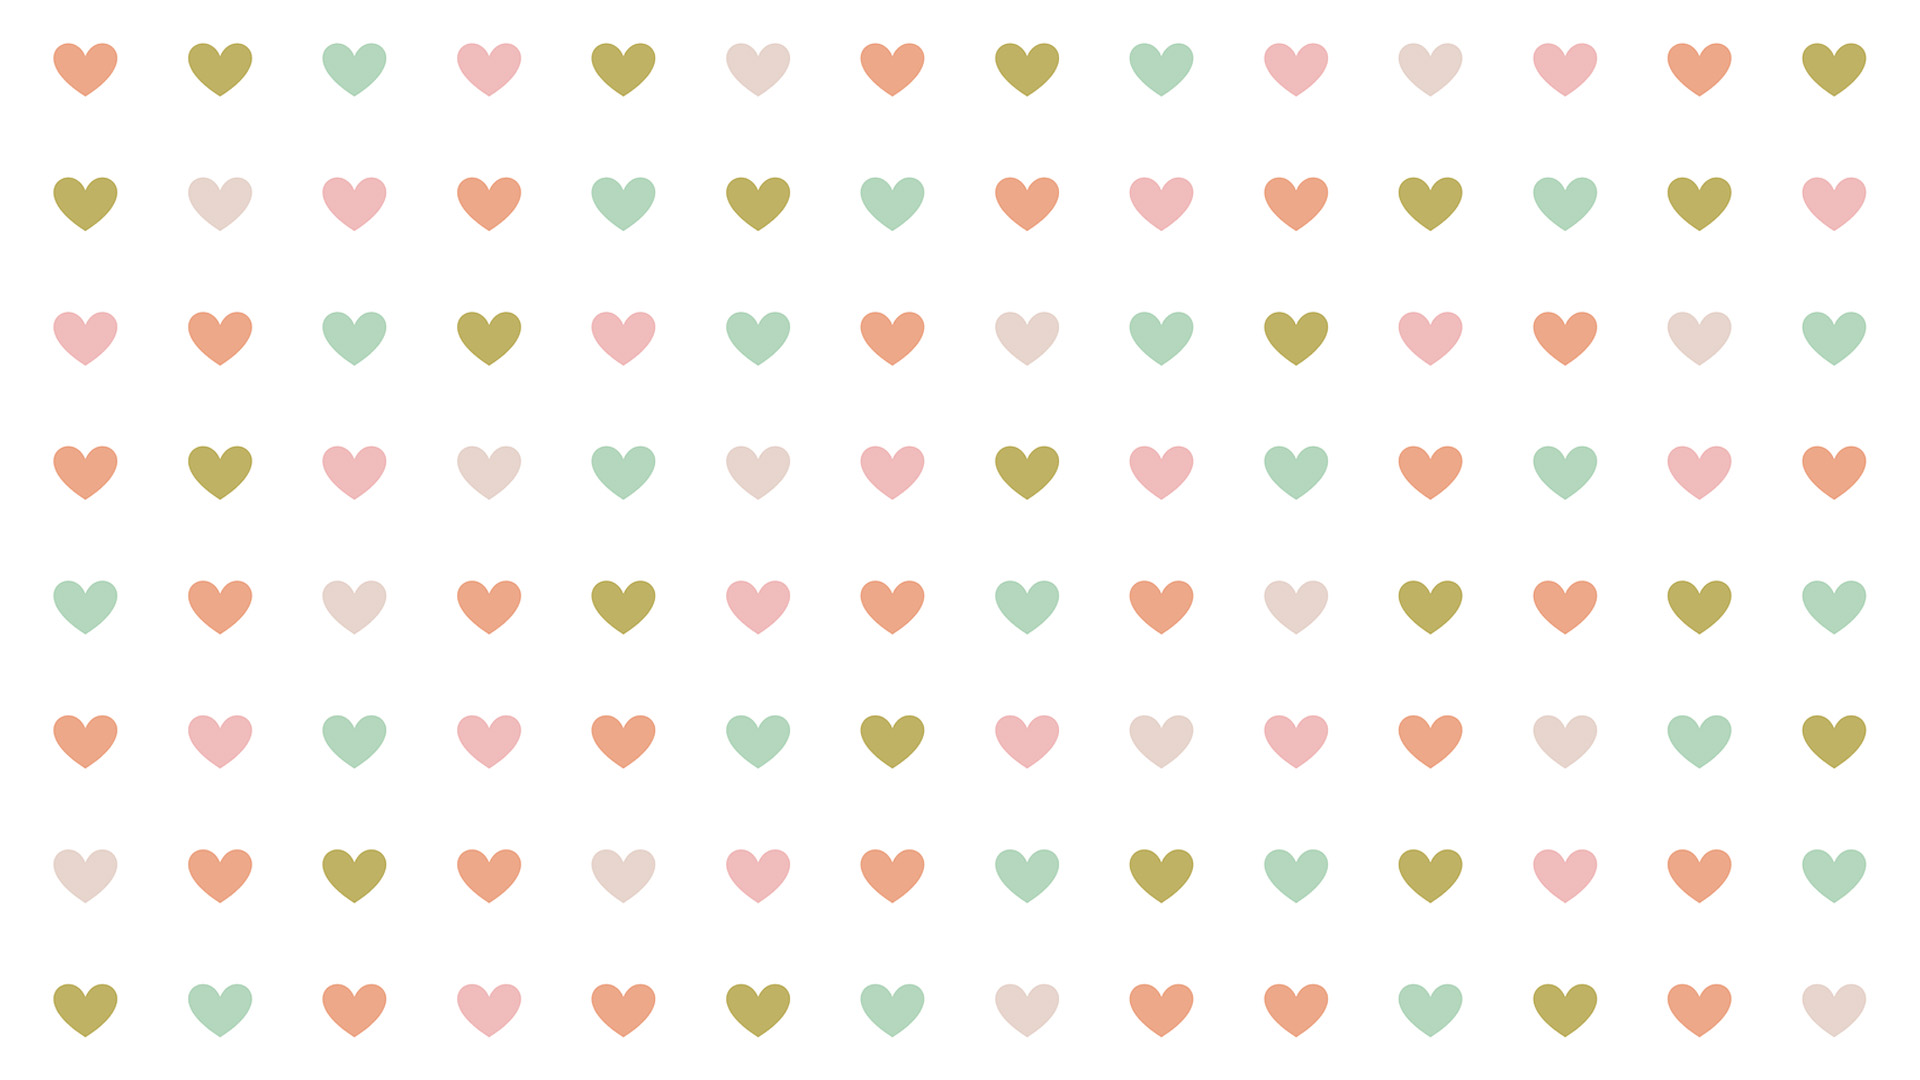 White background with Pink, green, blue, and purple hearts spanned across the graphic in lines.